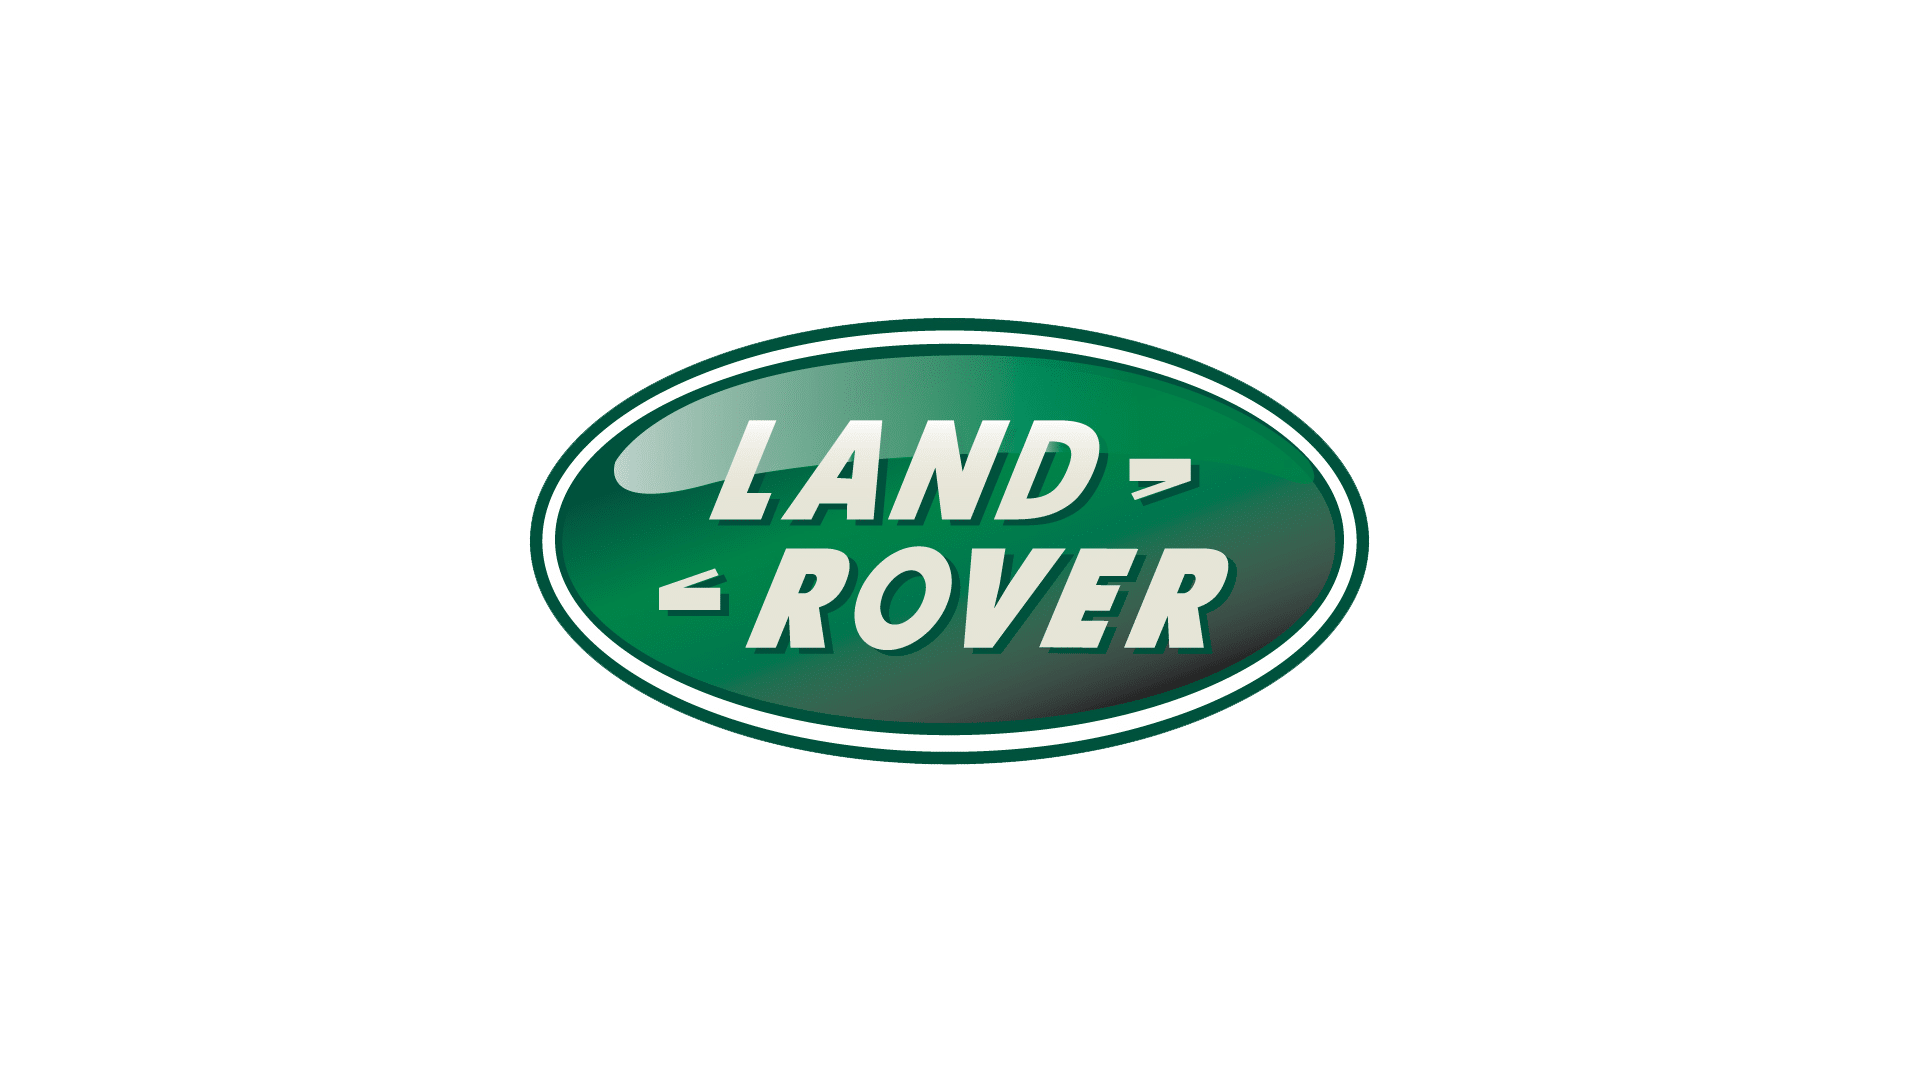 Affordable Used Land Rover Differentials